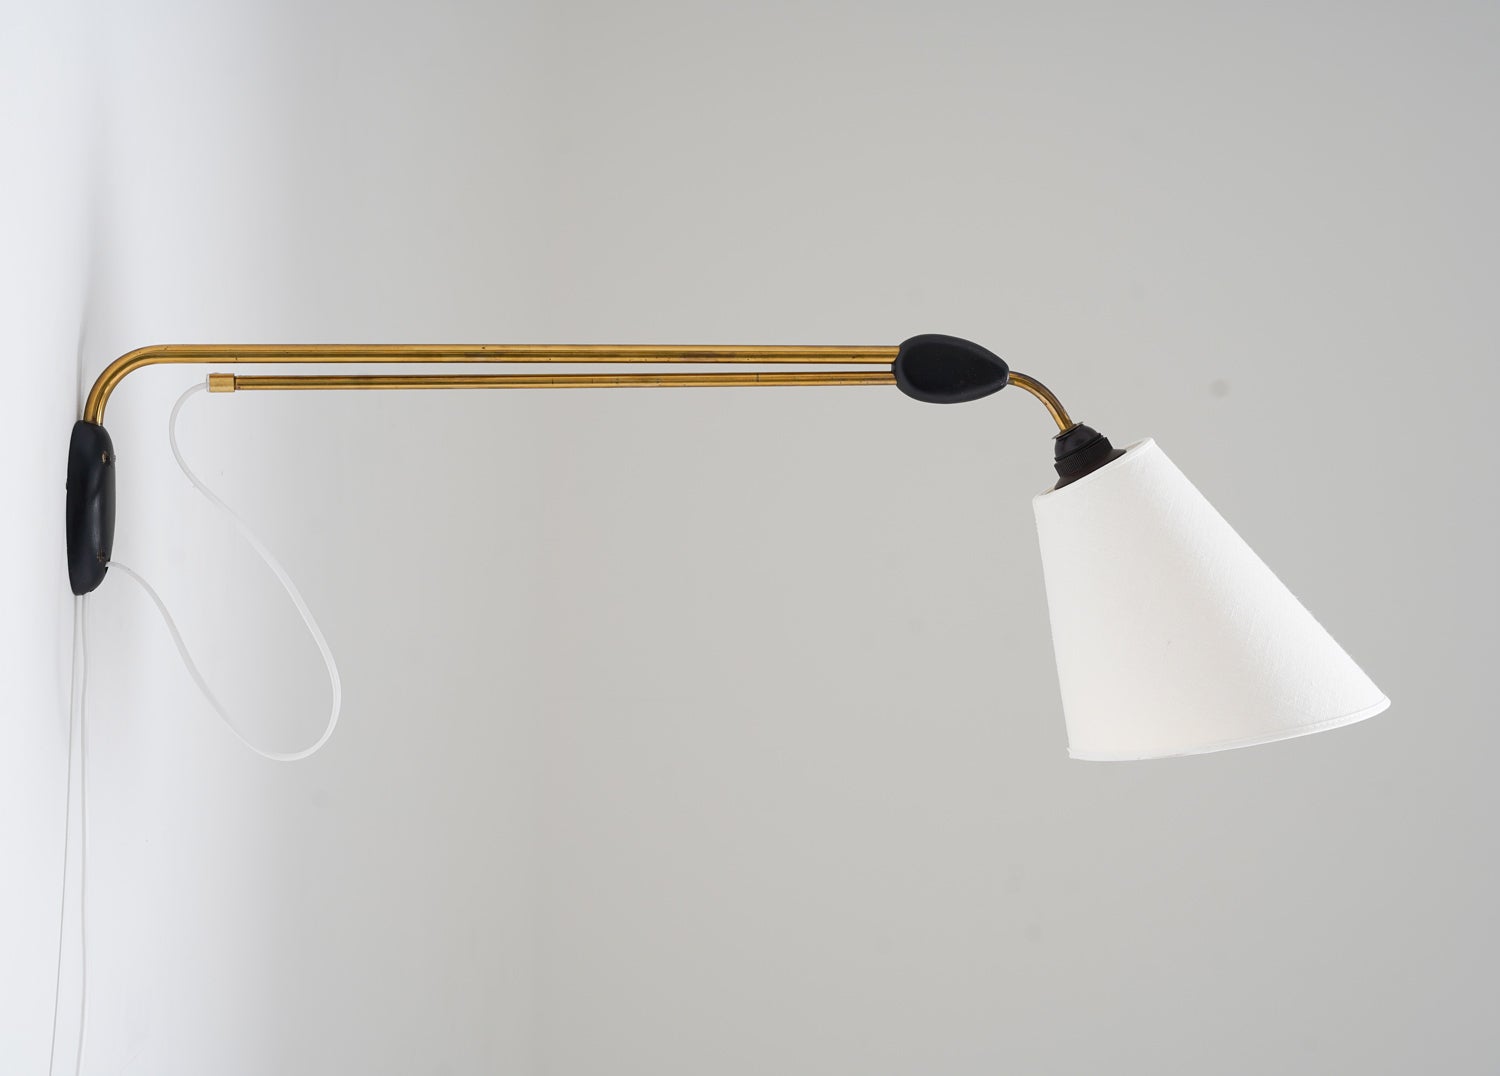 Introducing a beautiful wall lamp, manufactured in Sweden during the 1950s by Pagos. This lamp is made of two brass rods connected by a wooden piece, and the lower rod can slide to extend the length of the lamp. This allows you to adjust the lamp's